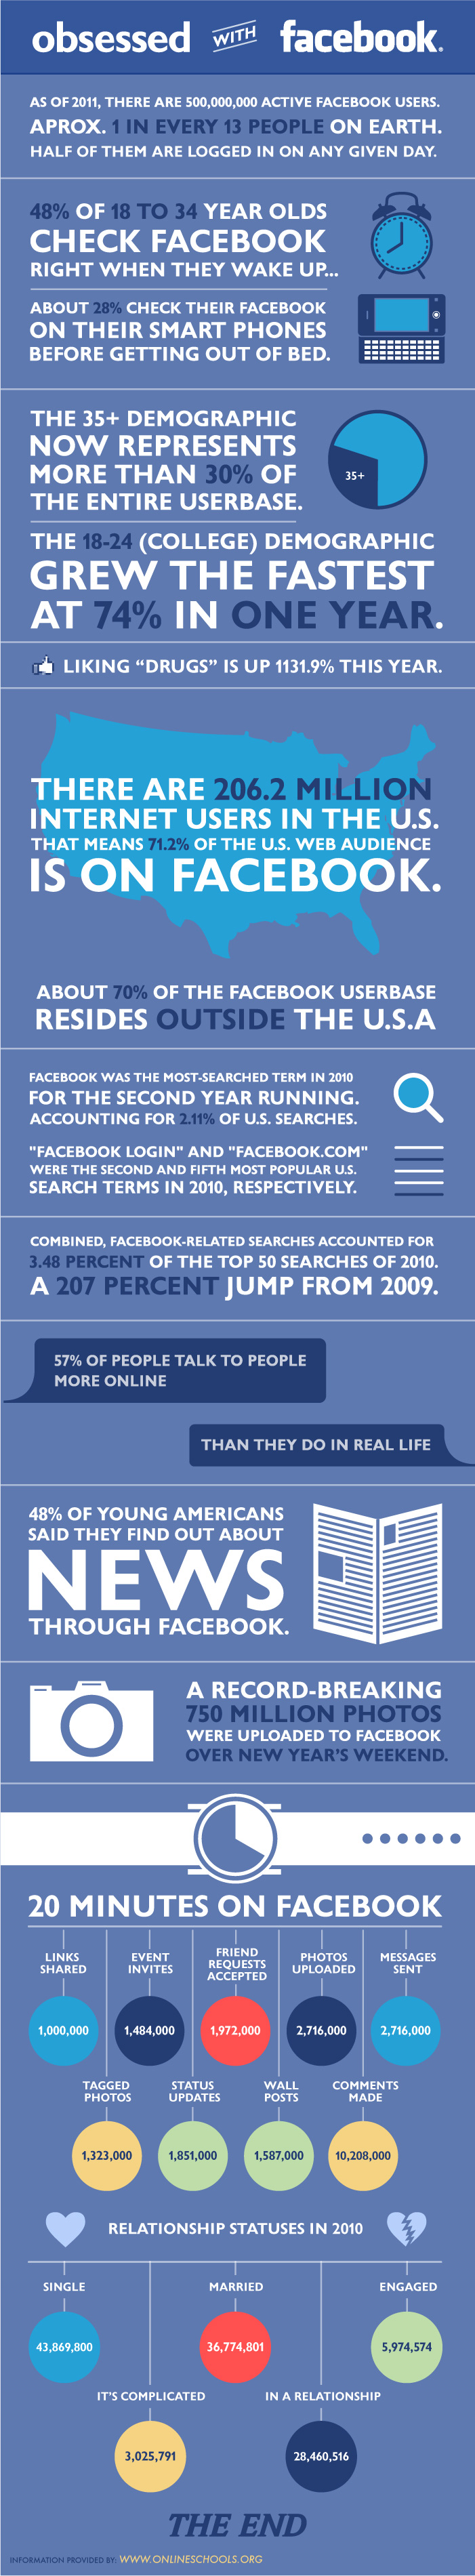 Are We Obsessed with Facebook?